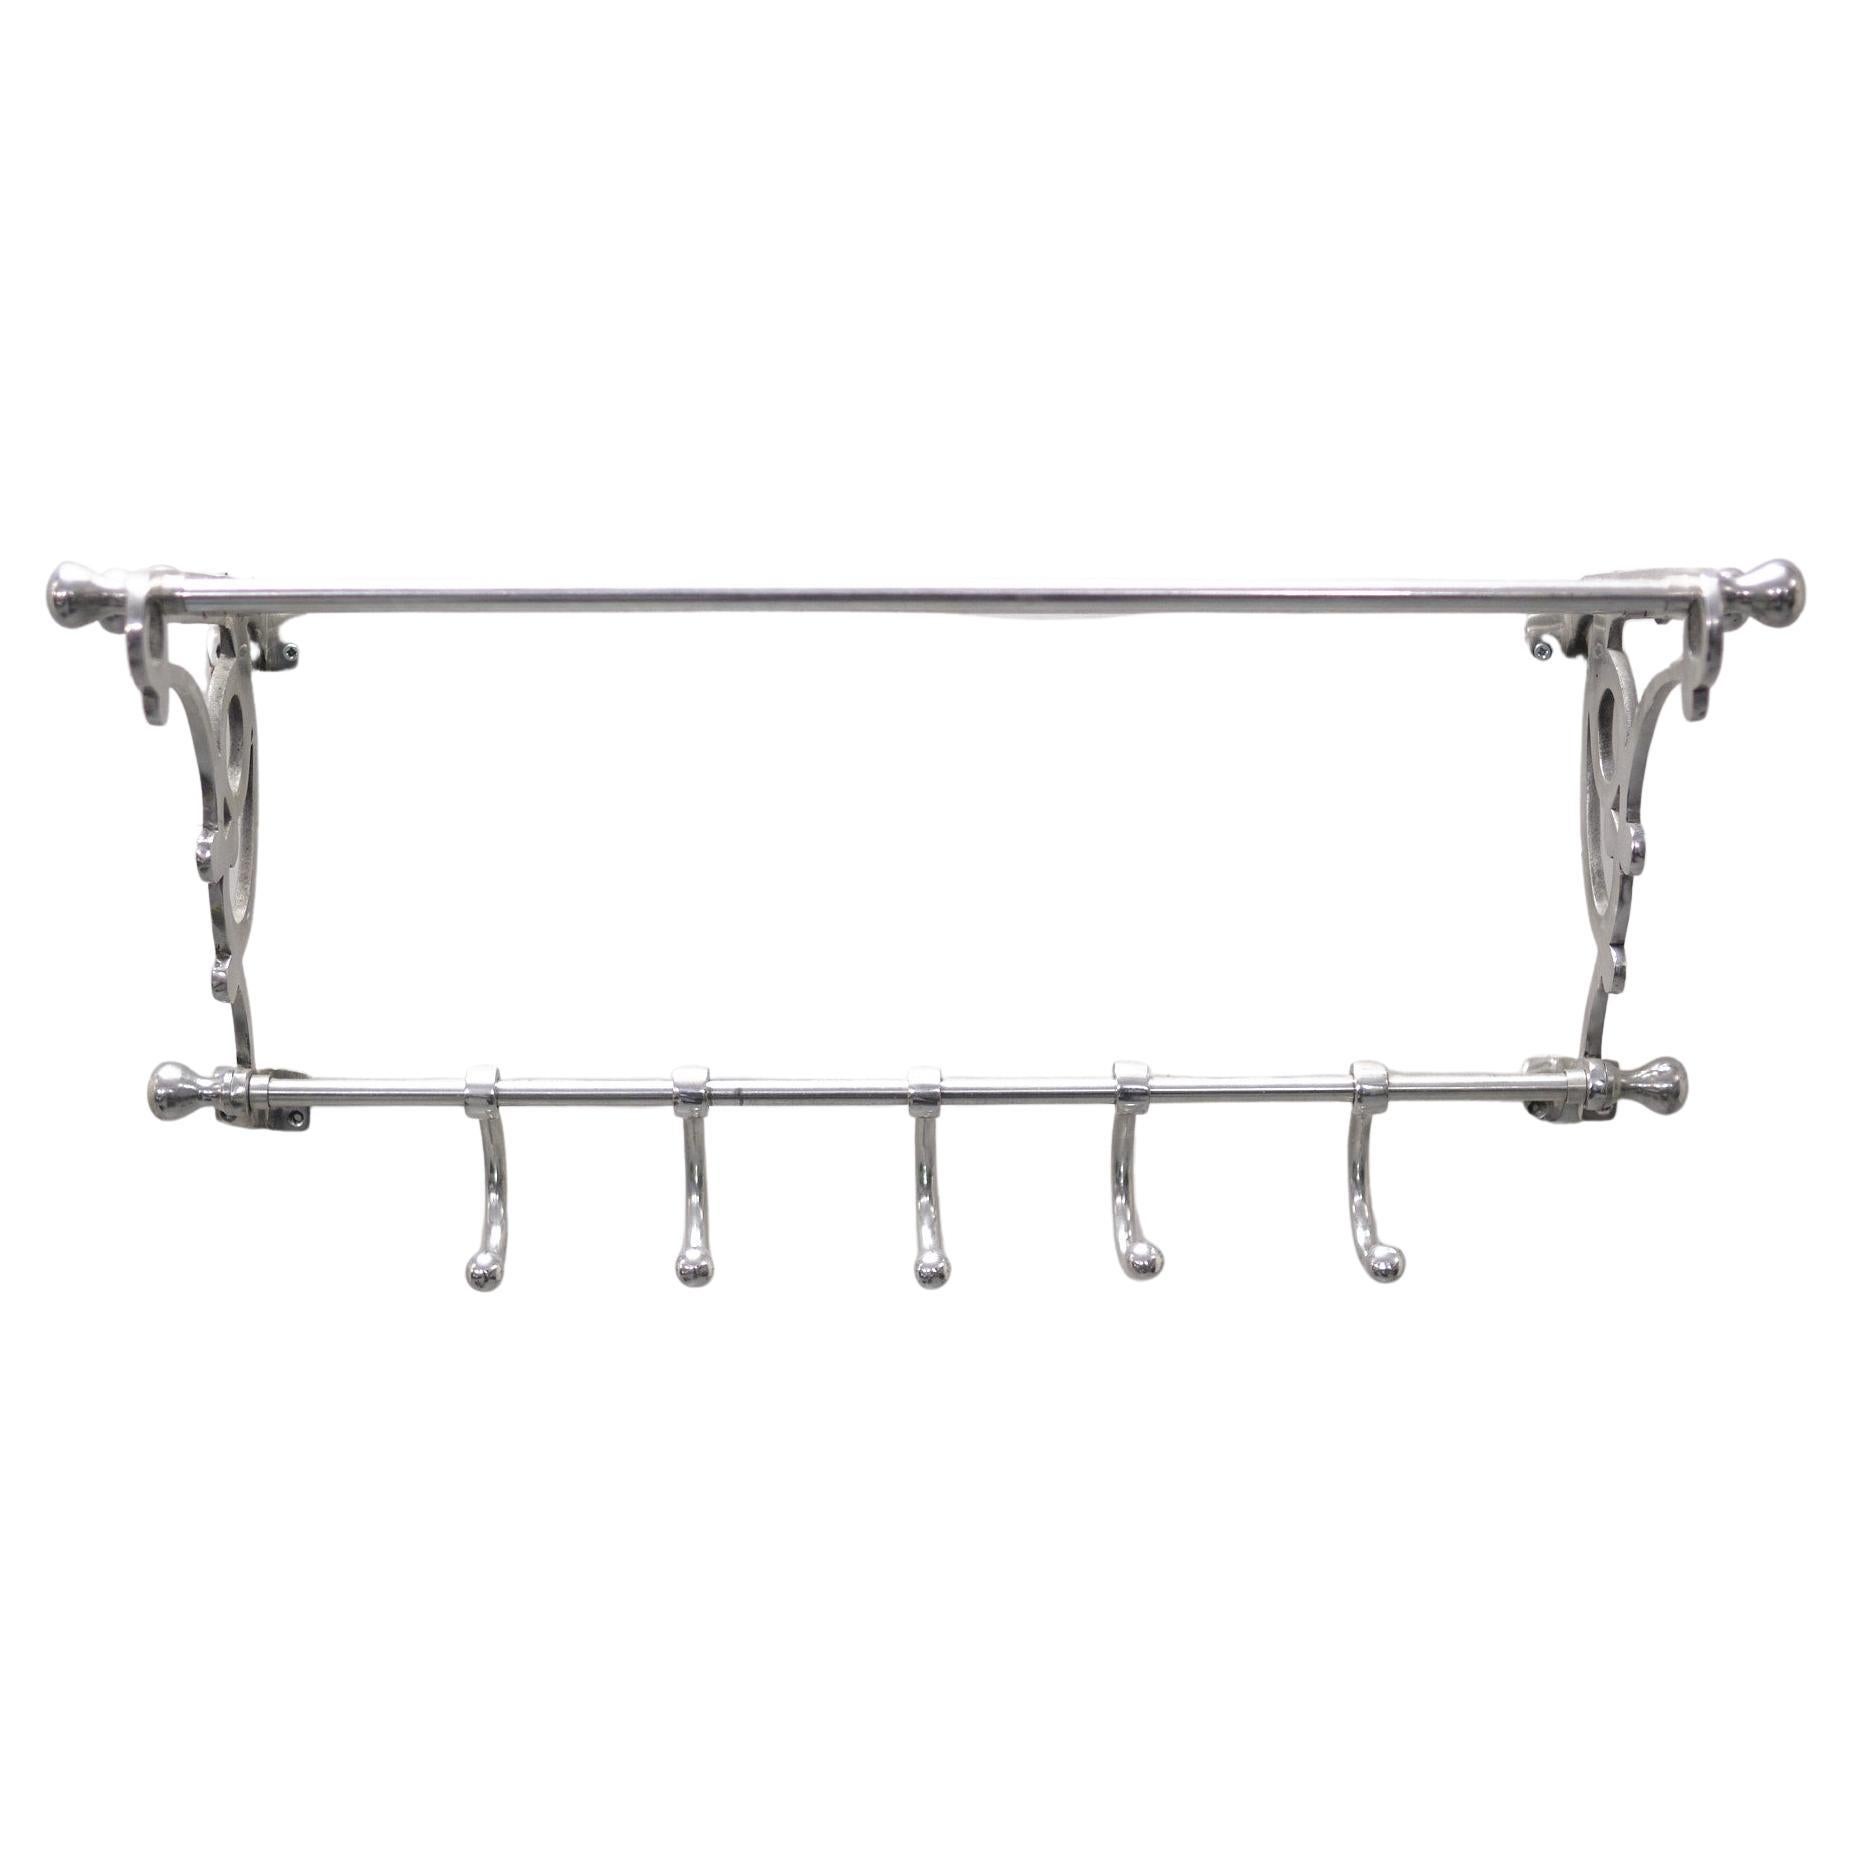 Very nice polished Aluminum hanging Coatrack. Art Deco style. 5 Large hooks 
comes with a rack on top for your Had or Cap.